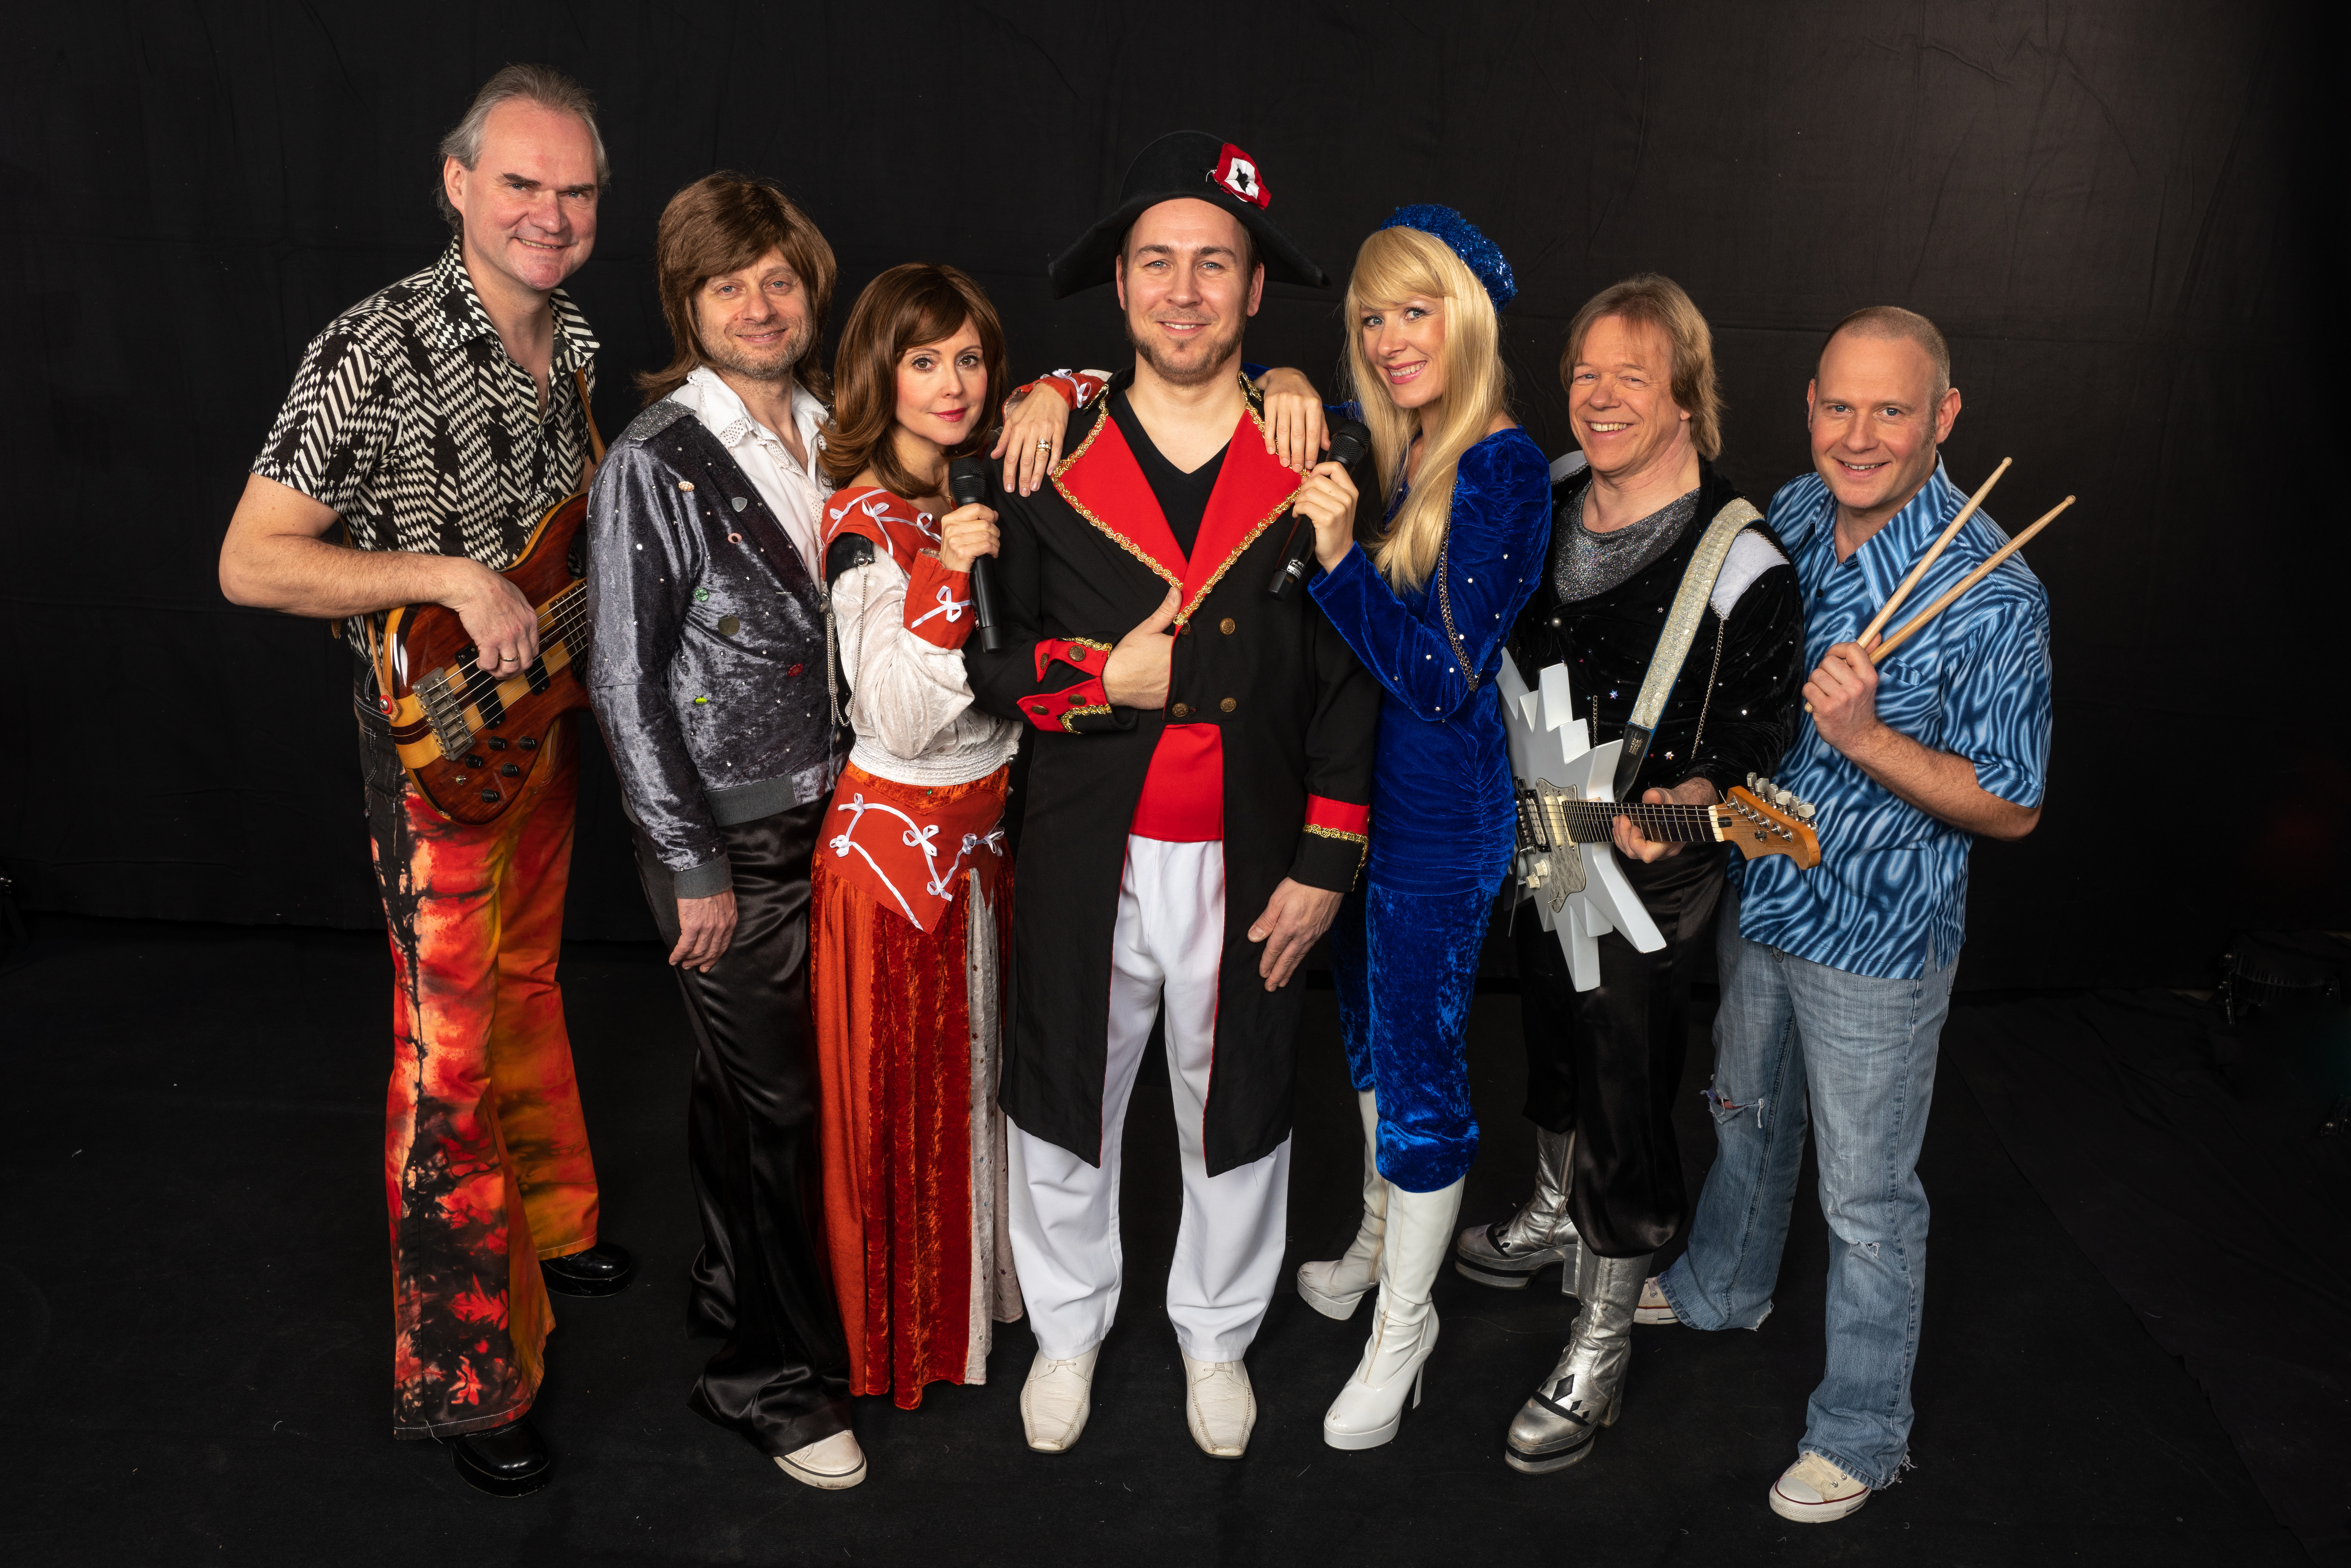 Neue Termine mit Waterloo – A Tribute to Abba